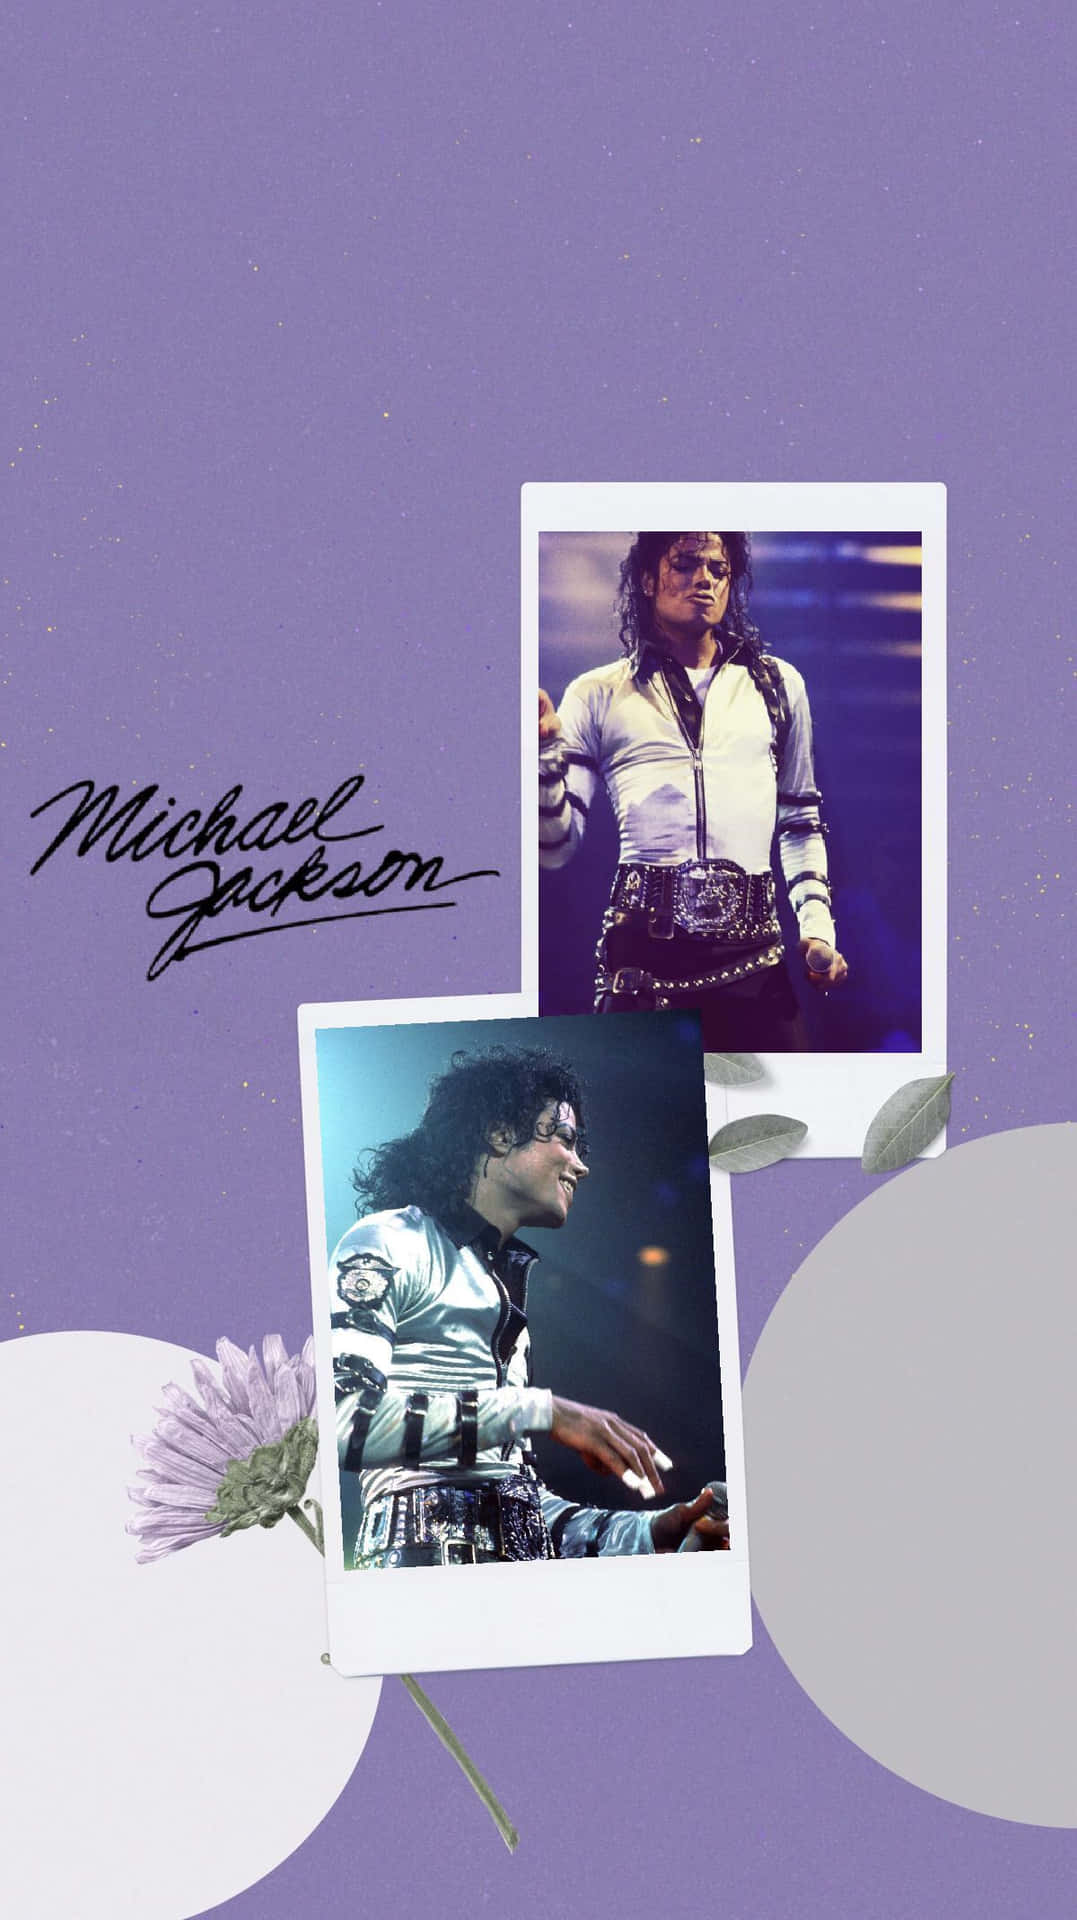 Dance with the King of Pop on Your iPhone Wallpaper